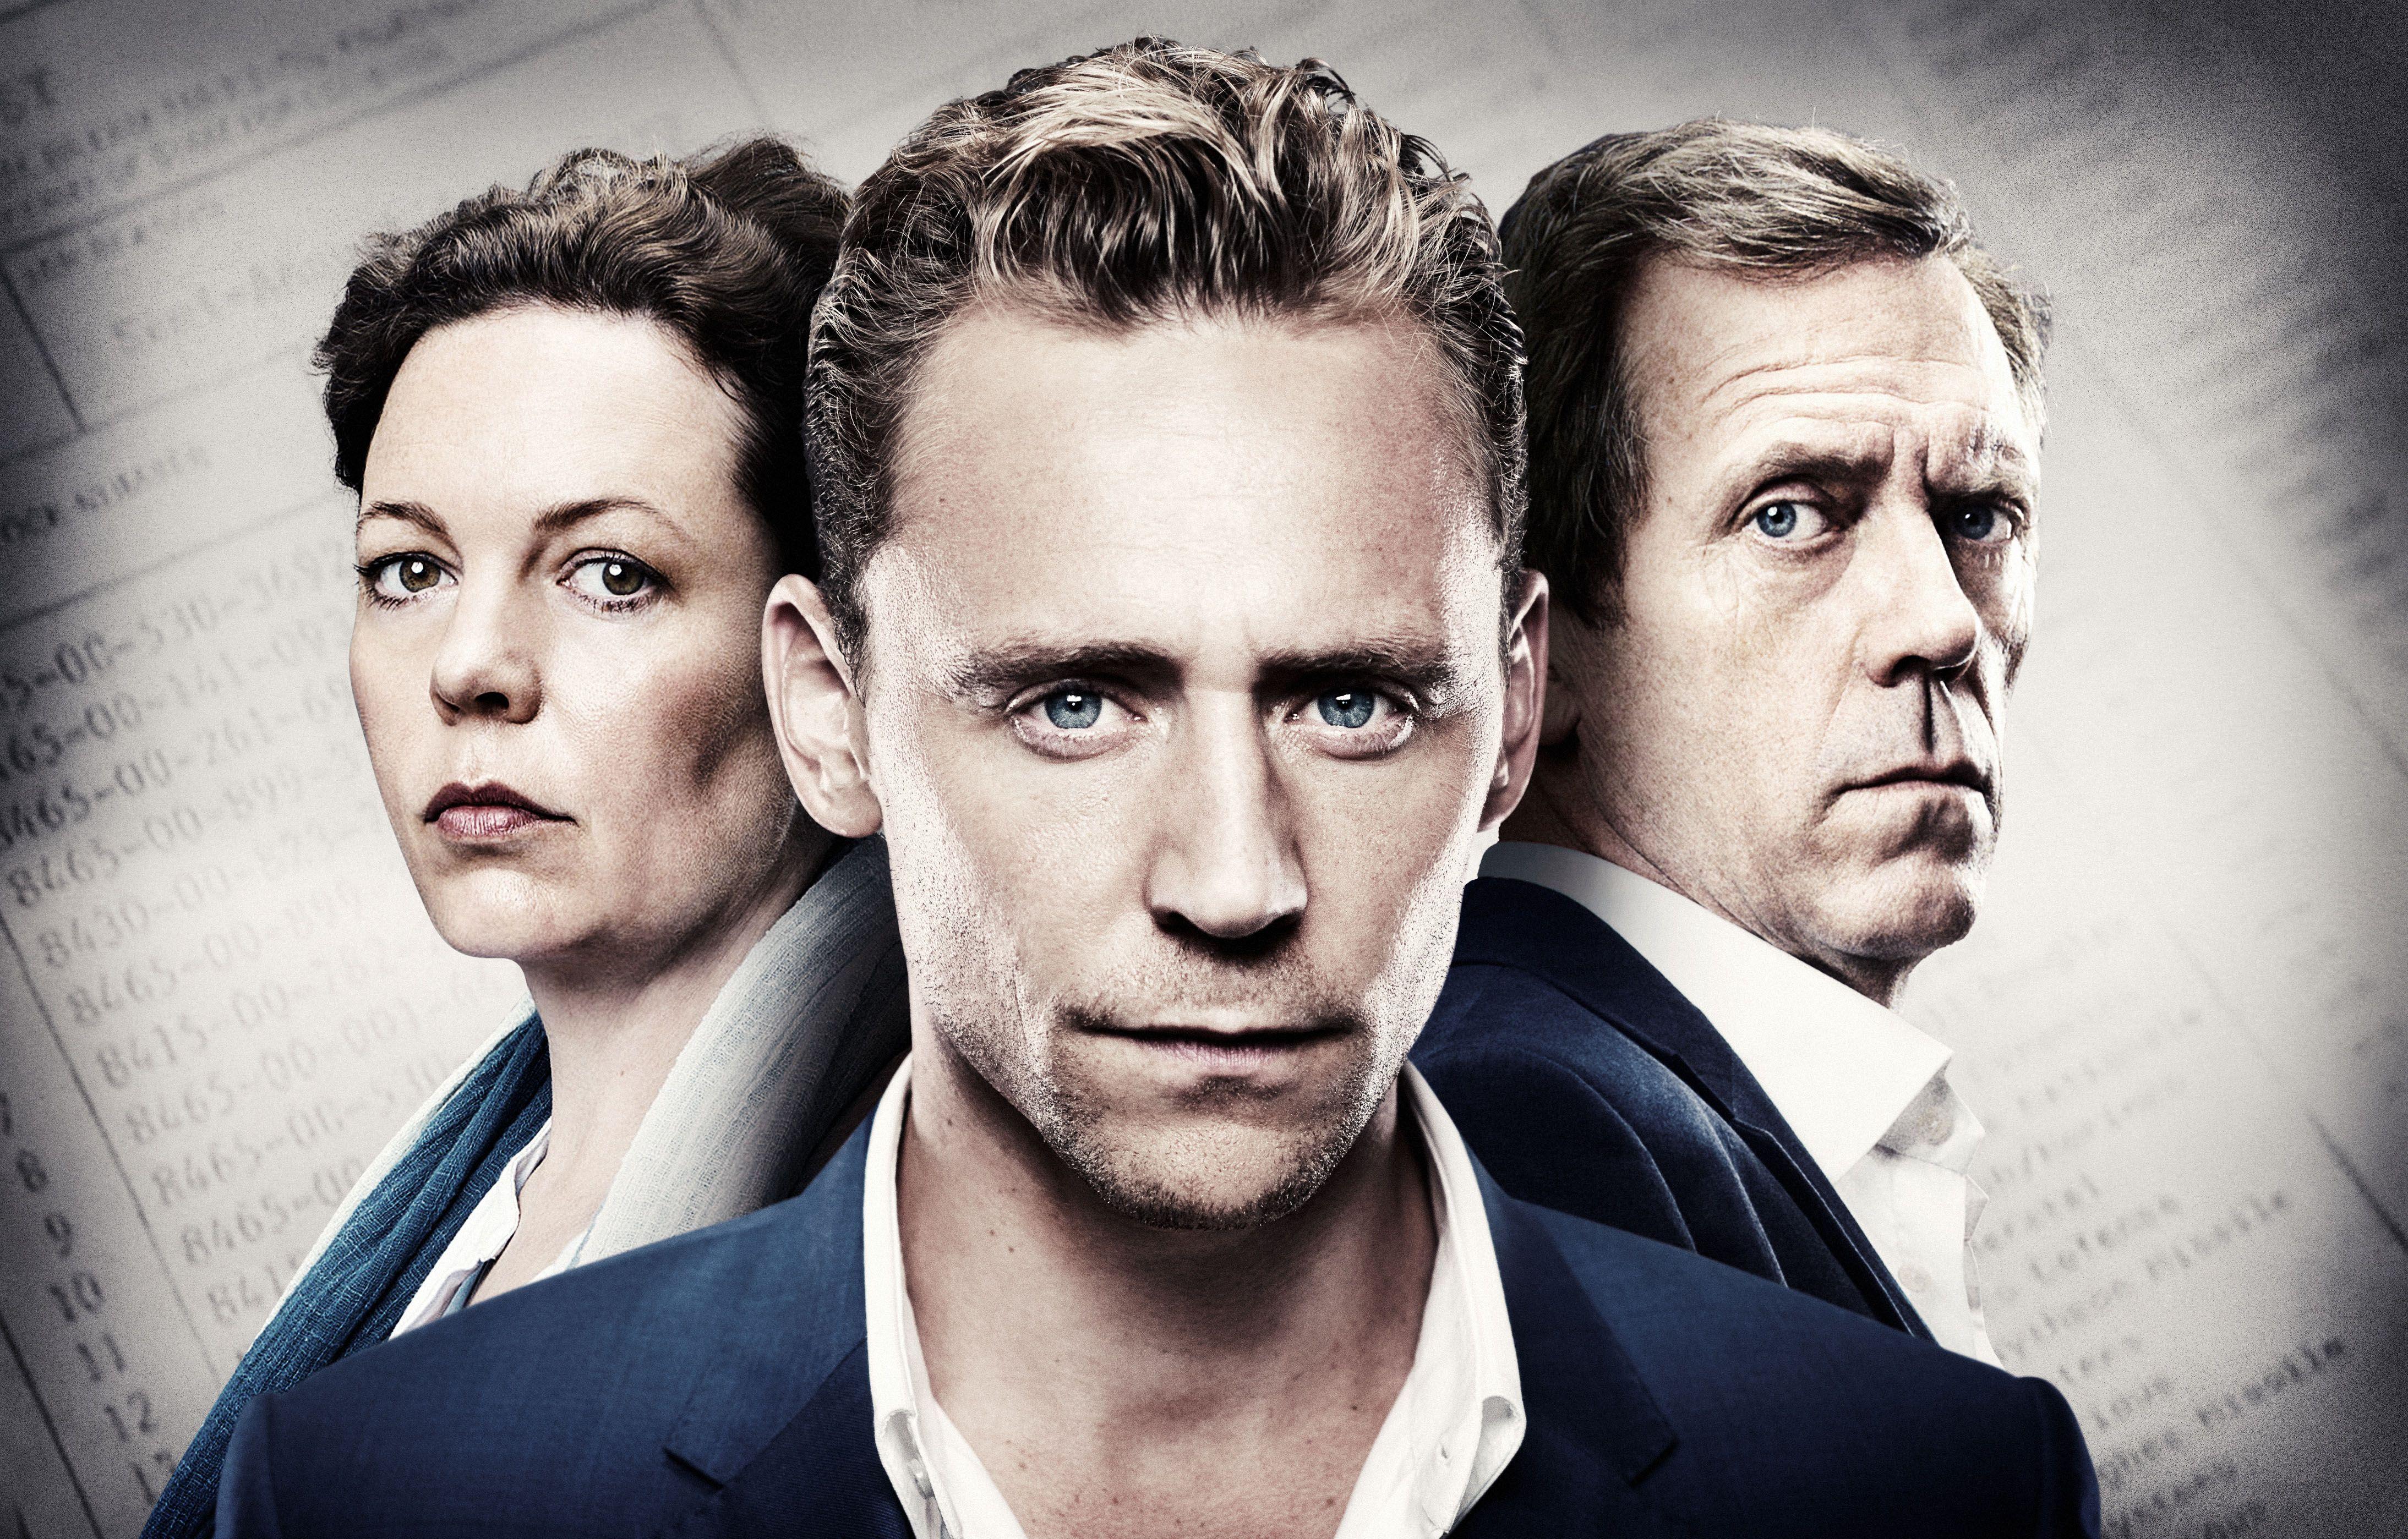 Wallpaper The Night Manager, Tom Hiddleston, Hugh Laurie, Olivia